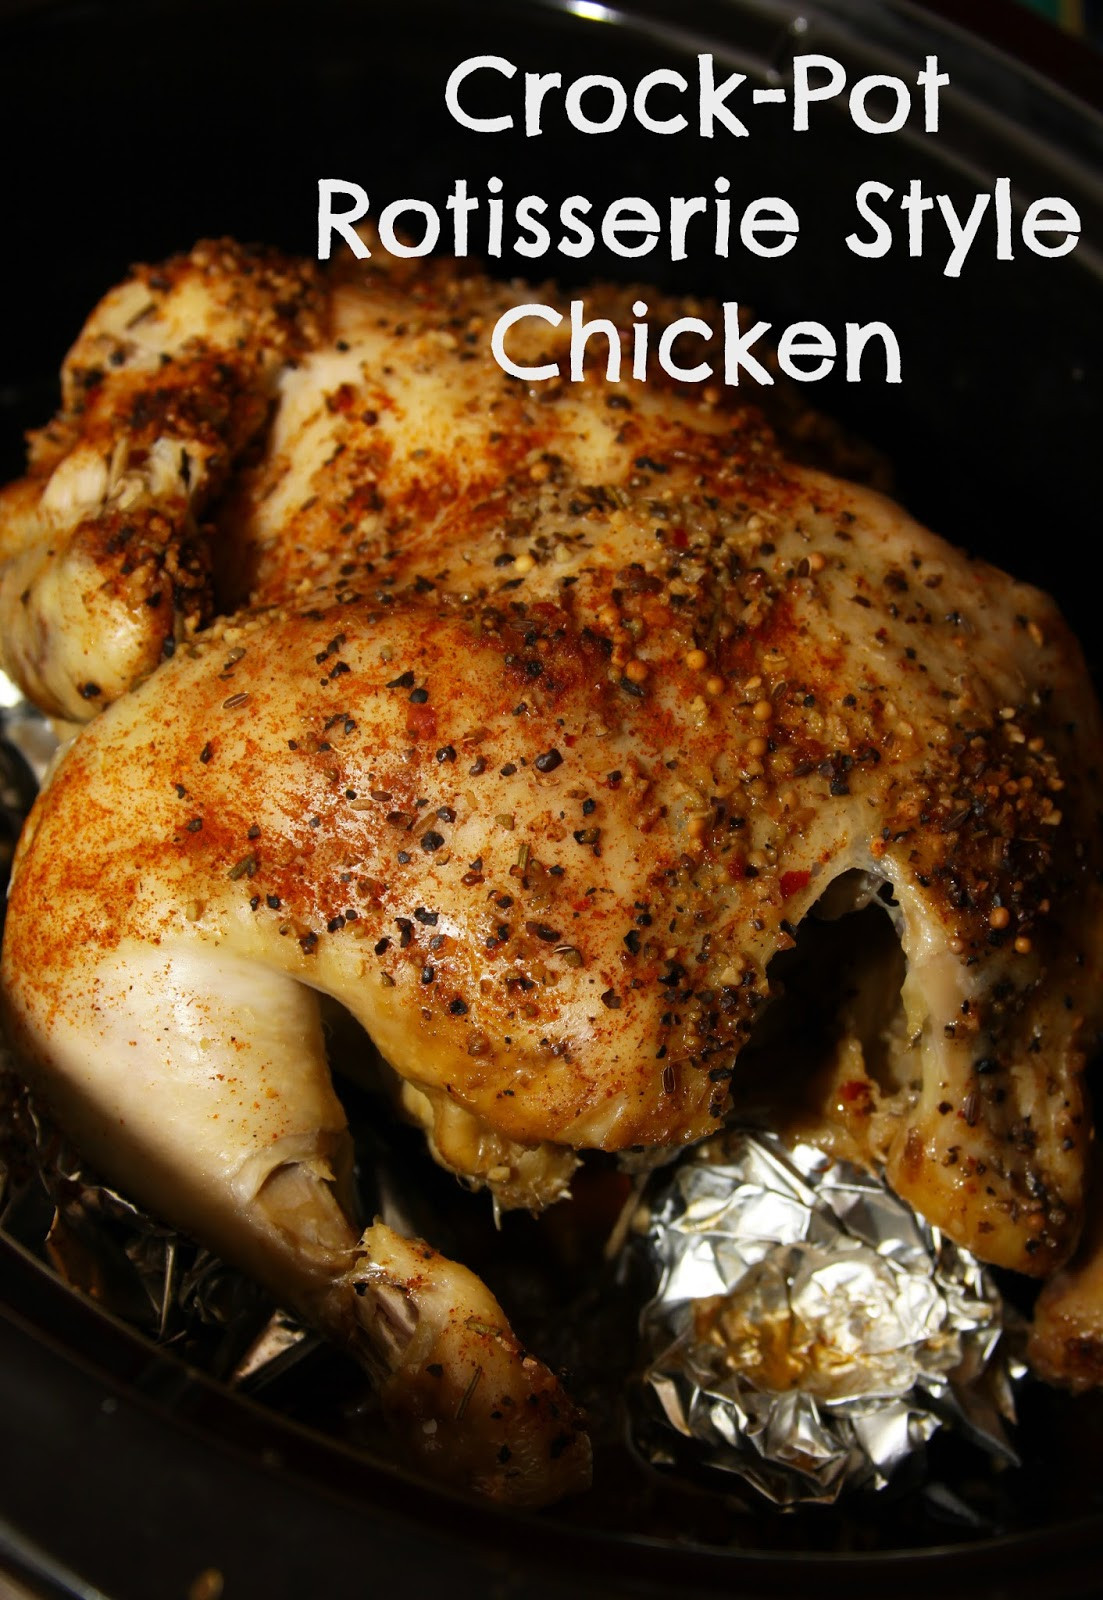 Cooking A Whole Chicken In A Crock Pot
 For the Love of Food Crock Pot Rotisserie Style Chicken